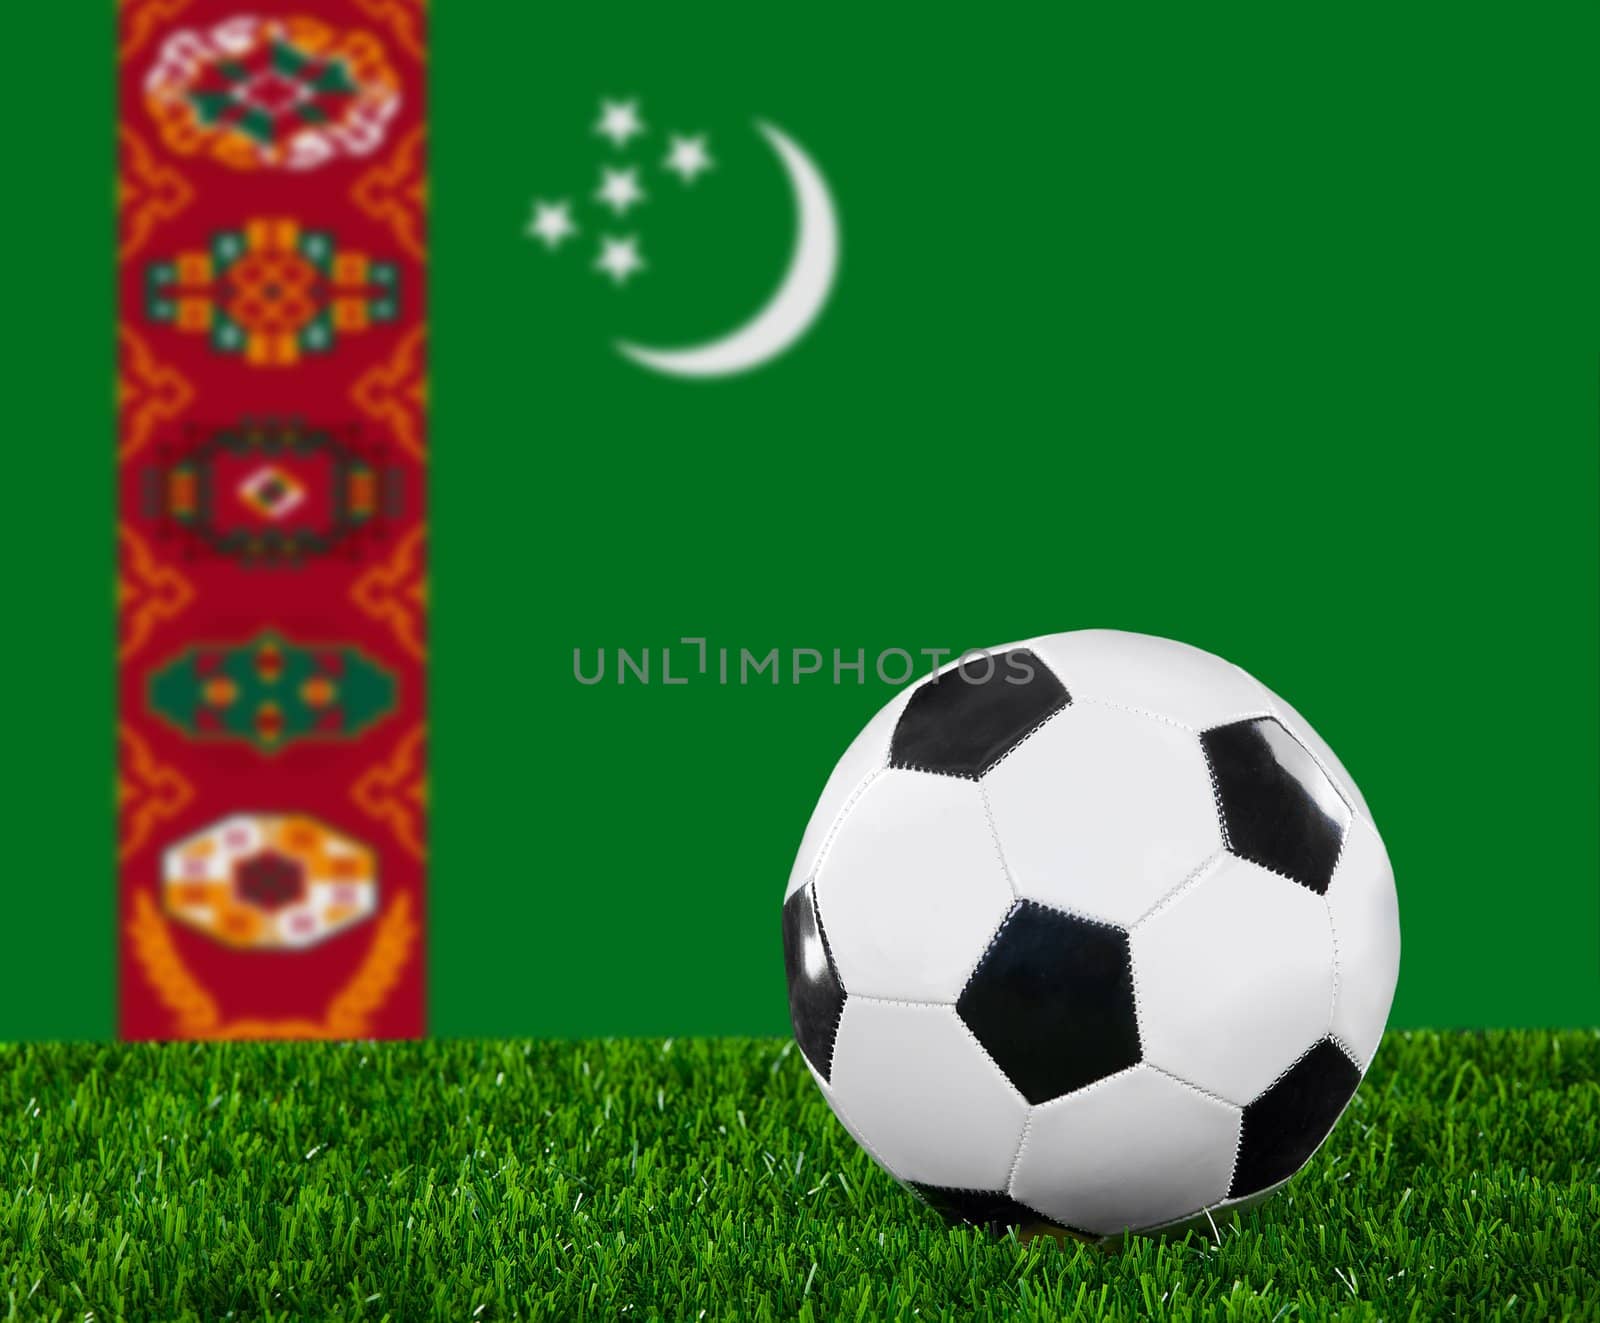 The Turkmen flag and soccer ball on the green grass
